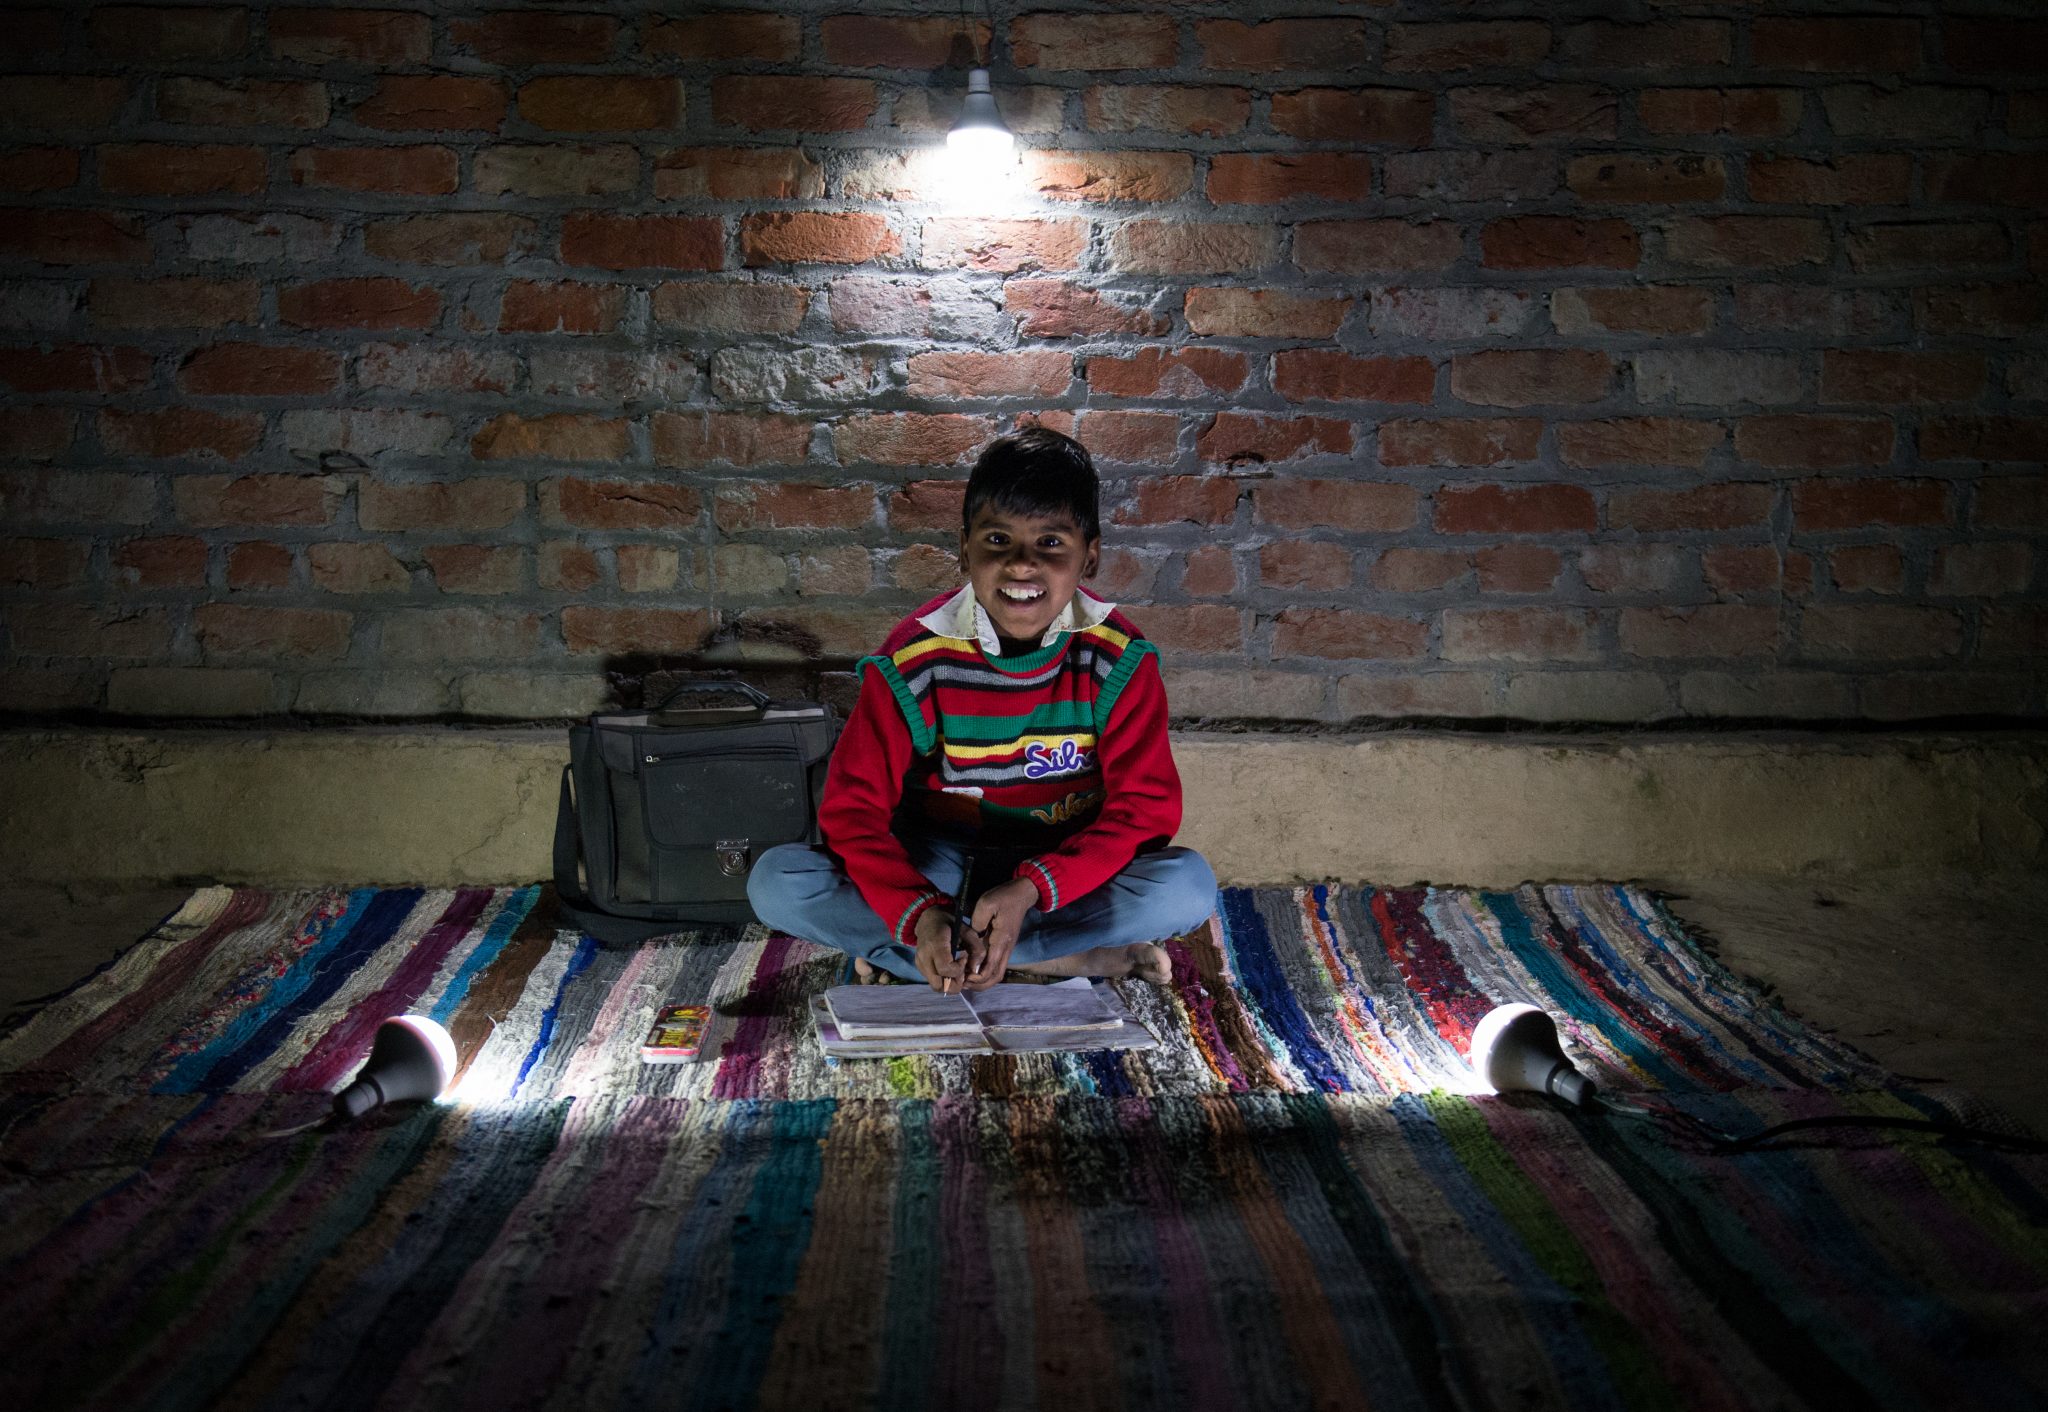 Eight-year-old Alam studying with the help of the solar lights. "We had to take turns to study as the light from our kerosene-powered lamps was insufficient for us five siblings. The dim light caused eye irritation due to smoke emitted and was straining to the eye. Studying for examinations was the most challenging part," says Farzana, Alam's sister. "We go to our friend's house to play carrom, snake and ladder games in the night. Since the solar bulbs are very luminous, all my siblings can study together and my grades have improved," he says. Alam aspires to become a school teacher so that he can brighten up the lives of the less fortunate in his community. Summary: Solar bulbs provided by World Vision have provided a new way of life to more than 400 families in Sambhal, Uttar Pradesh, India. Daily activities have extended into the evenings by about six hours and families such as Farzana's are experiencing much more productivity. Project/ADP Name: Moradabad ADP